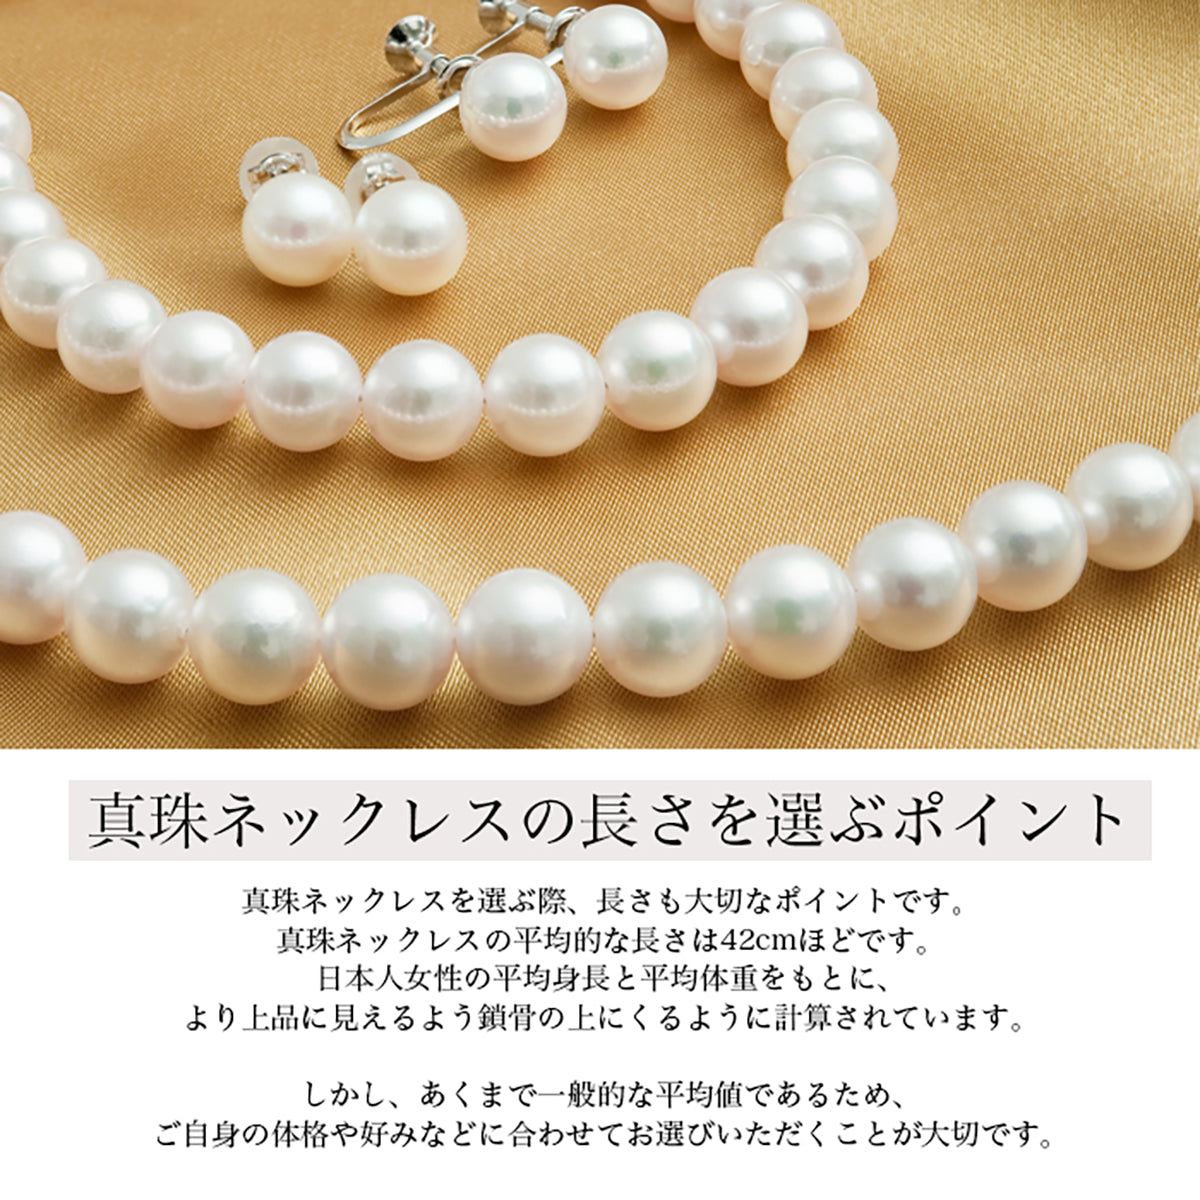 [Specially Selected Material: Florence Pearl] Akoya Pearl Formal Necklace Set of 2 [8.0-8.5mm] Earrings/Earrings White Roll Thickness 0.5mm or More Certificate of Authenticity Storage Case Included